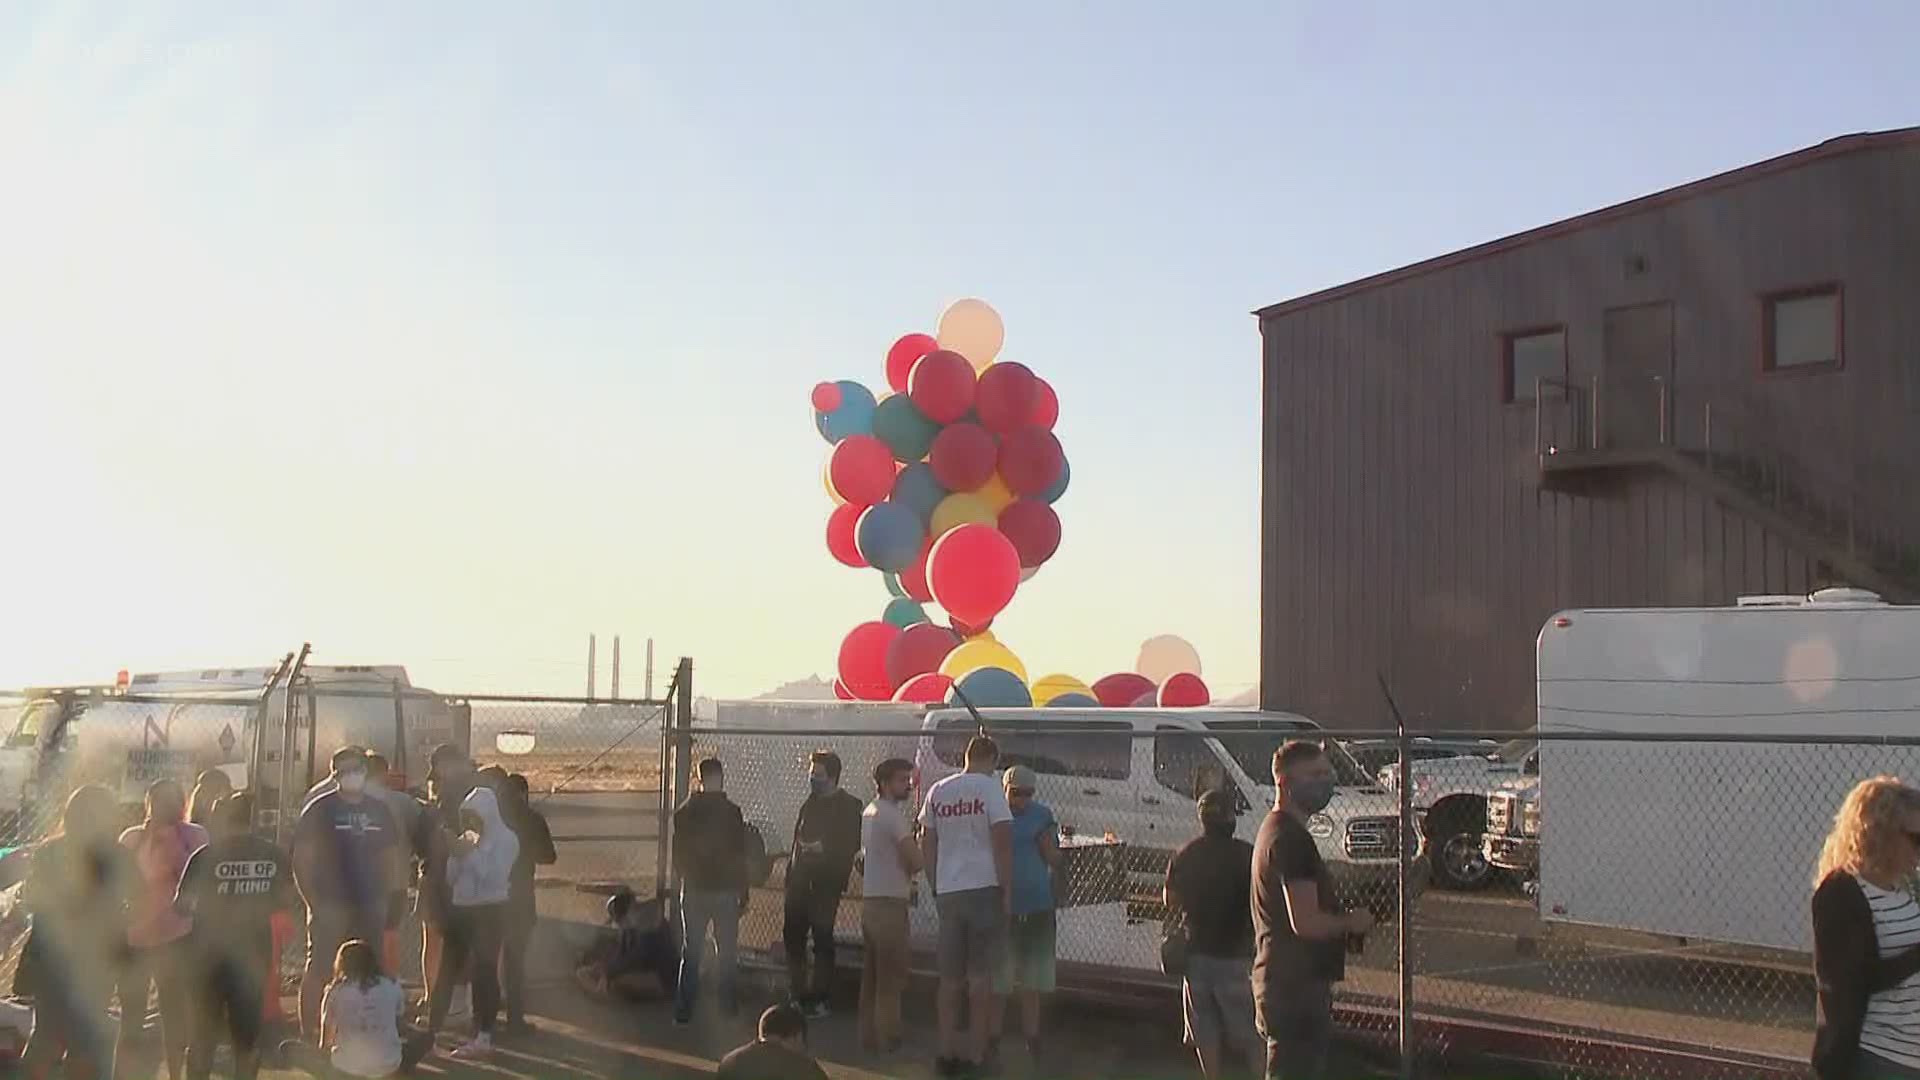 A small crowd has gathered in Page, Arizona, where David Blaine is expected to float about three miles in the air in his latest stunt.